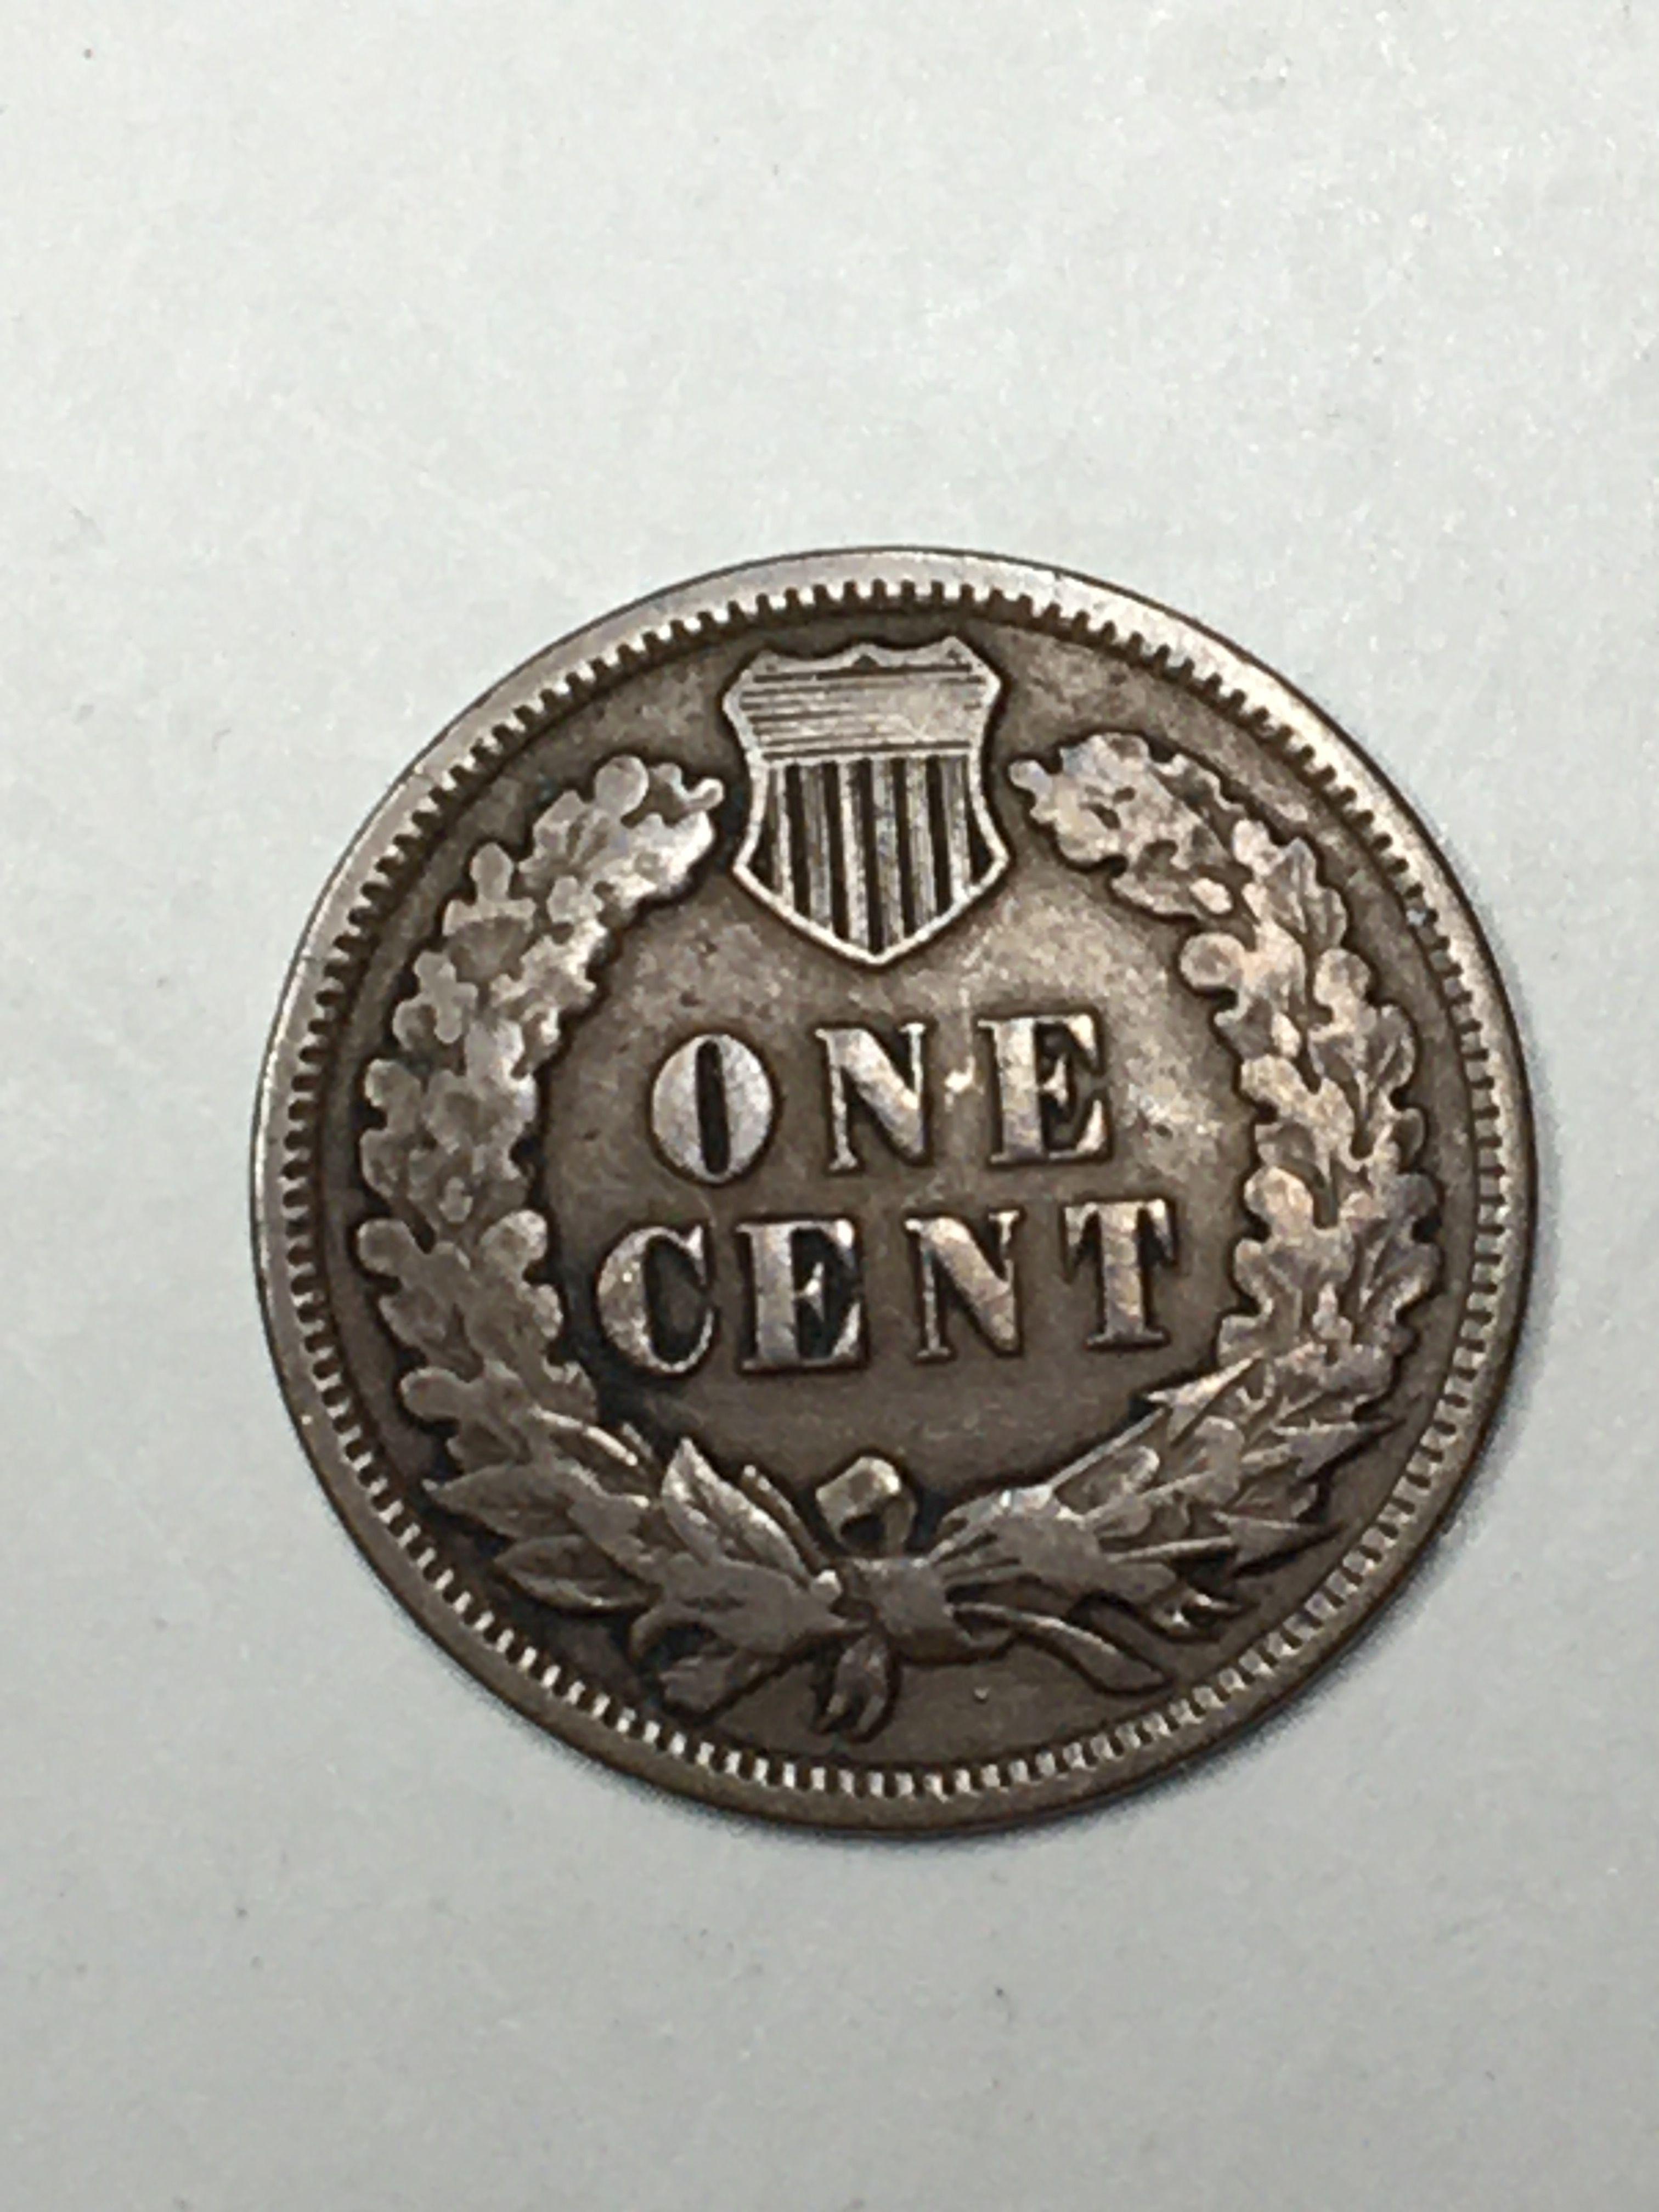 1909 Indian Head Cent Last Year Issue